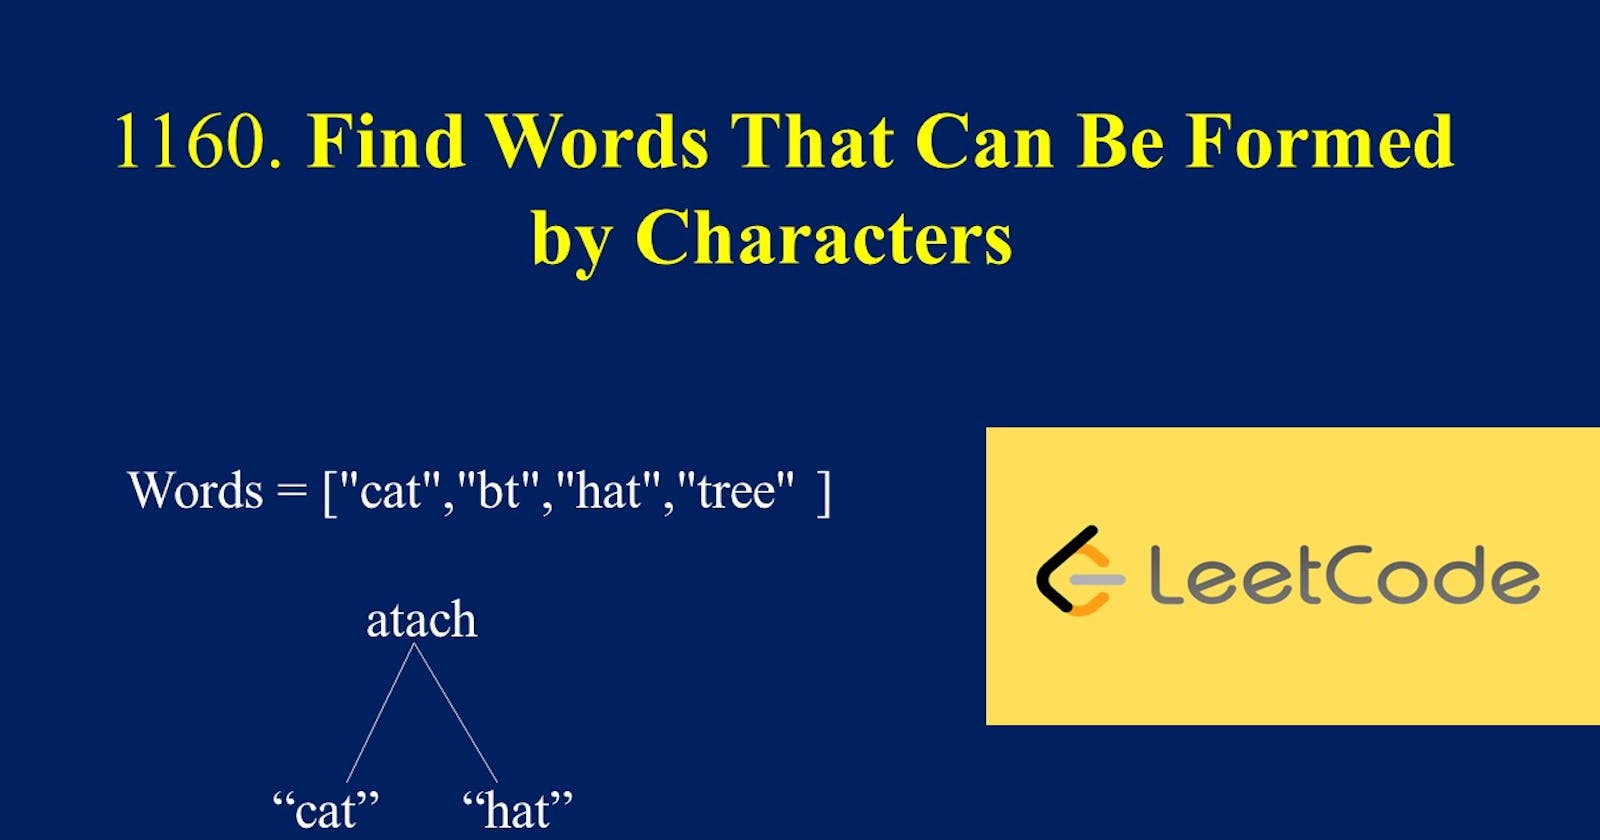 1160. Find Words That Can Be Formed by Characters